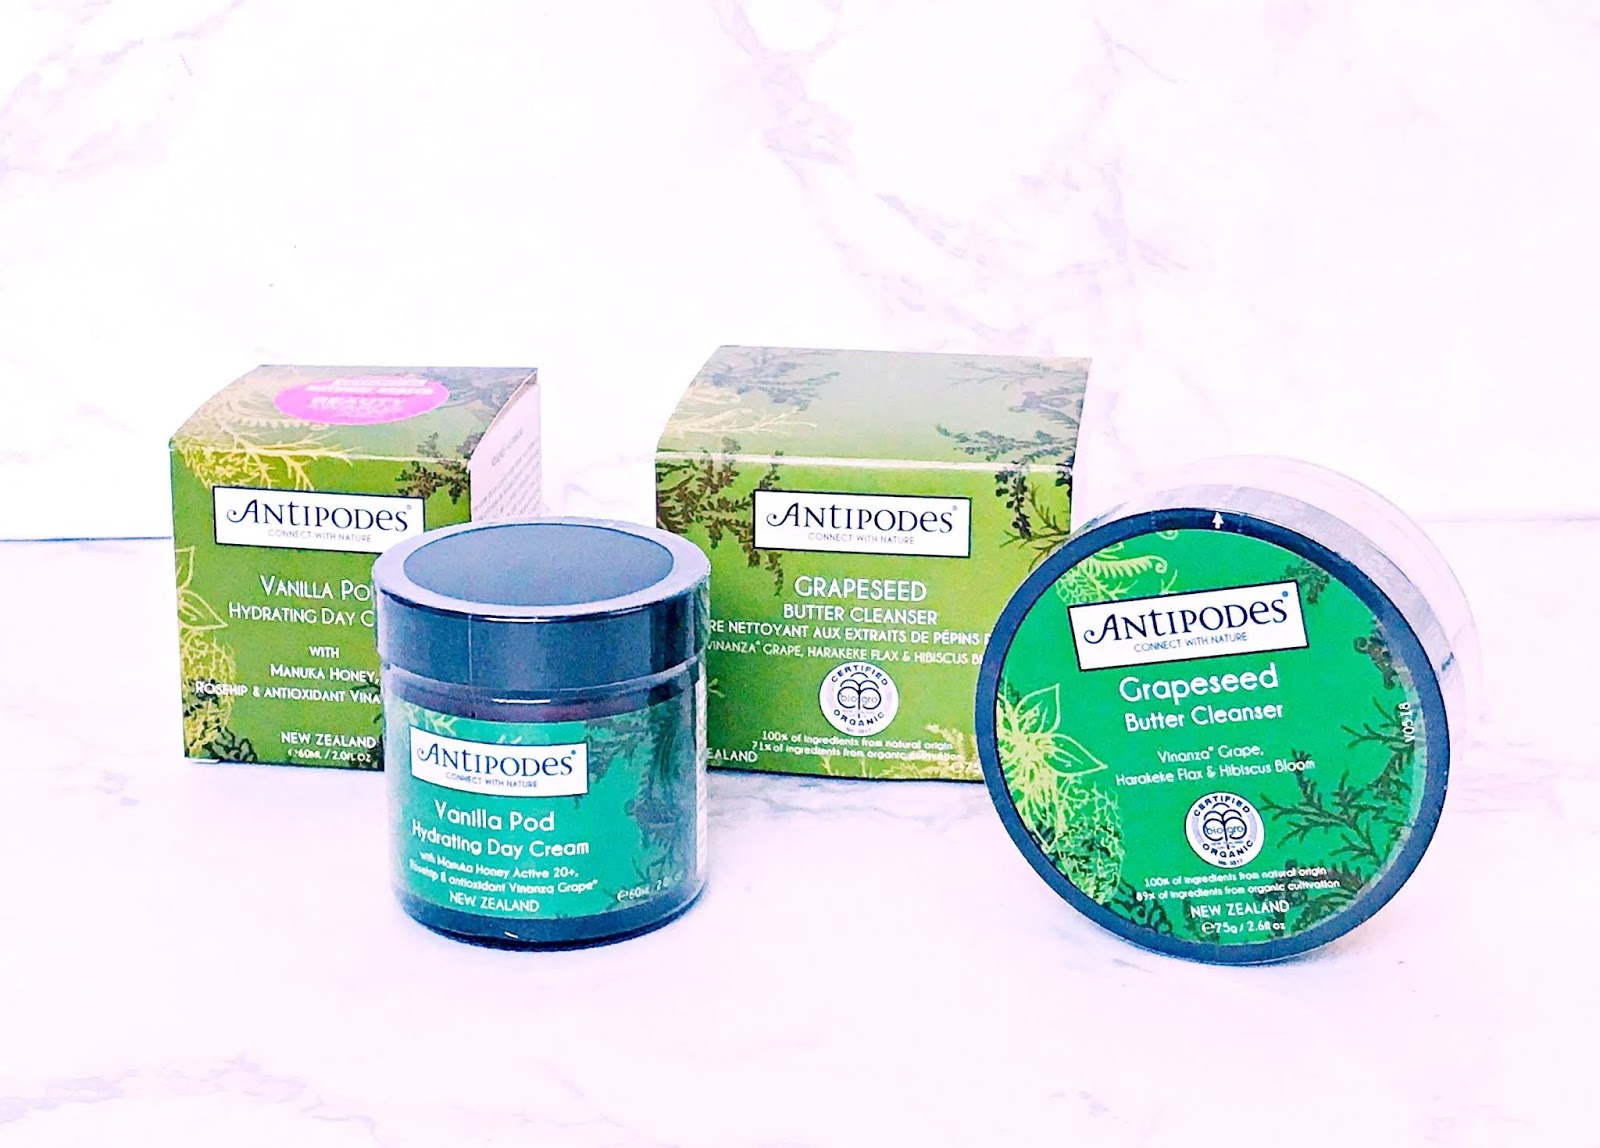 Antipodes skincare giveaway